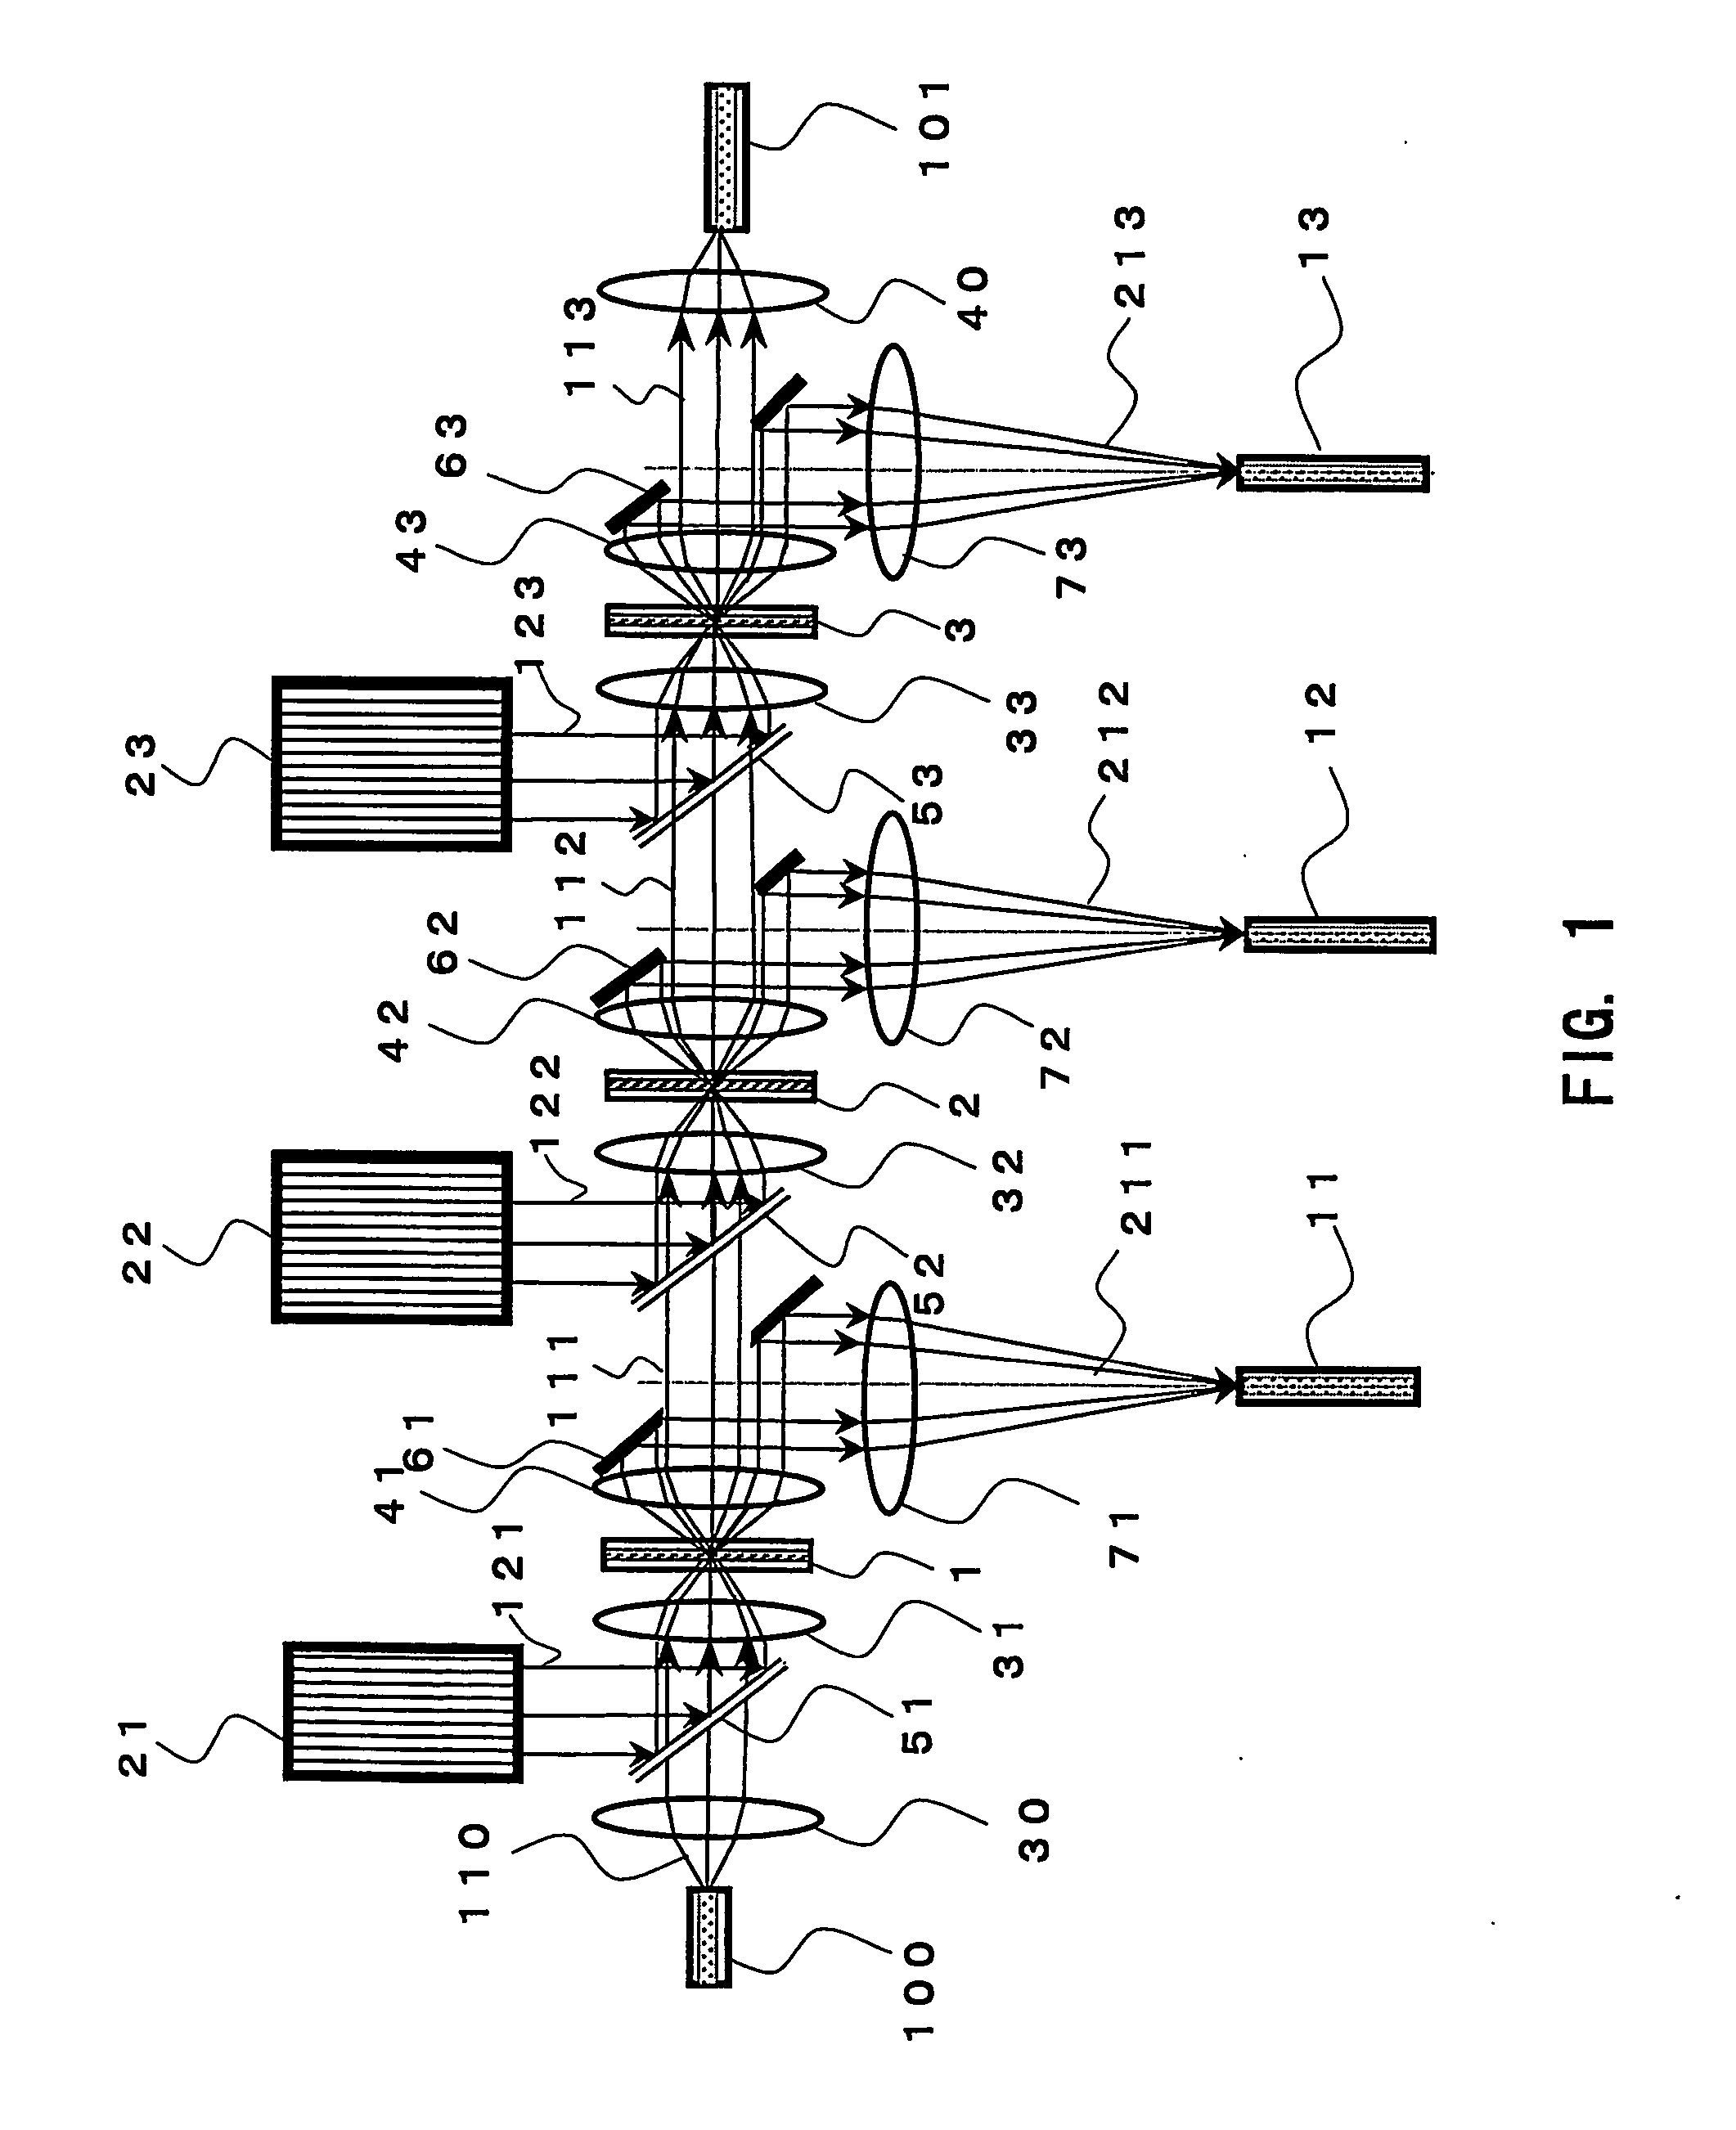 Optical path switching device and method